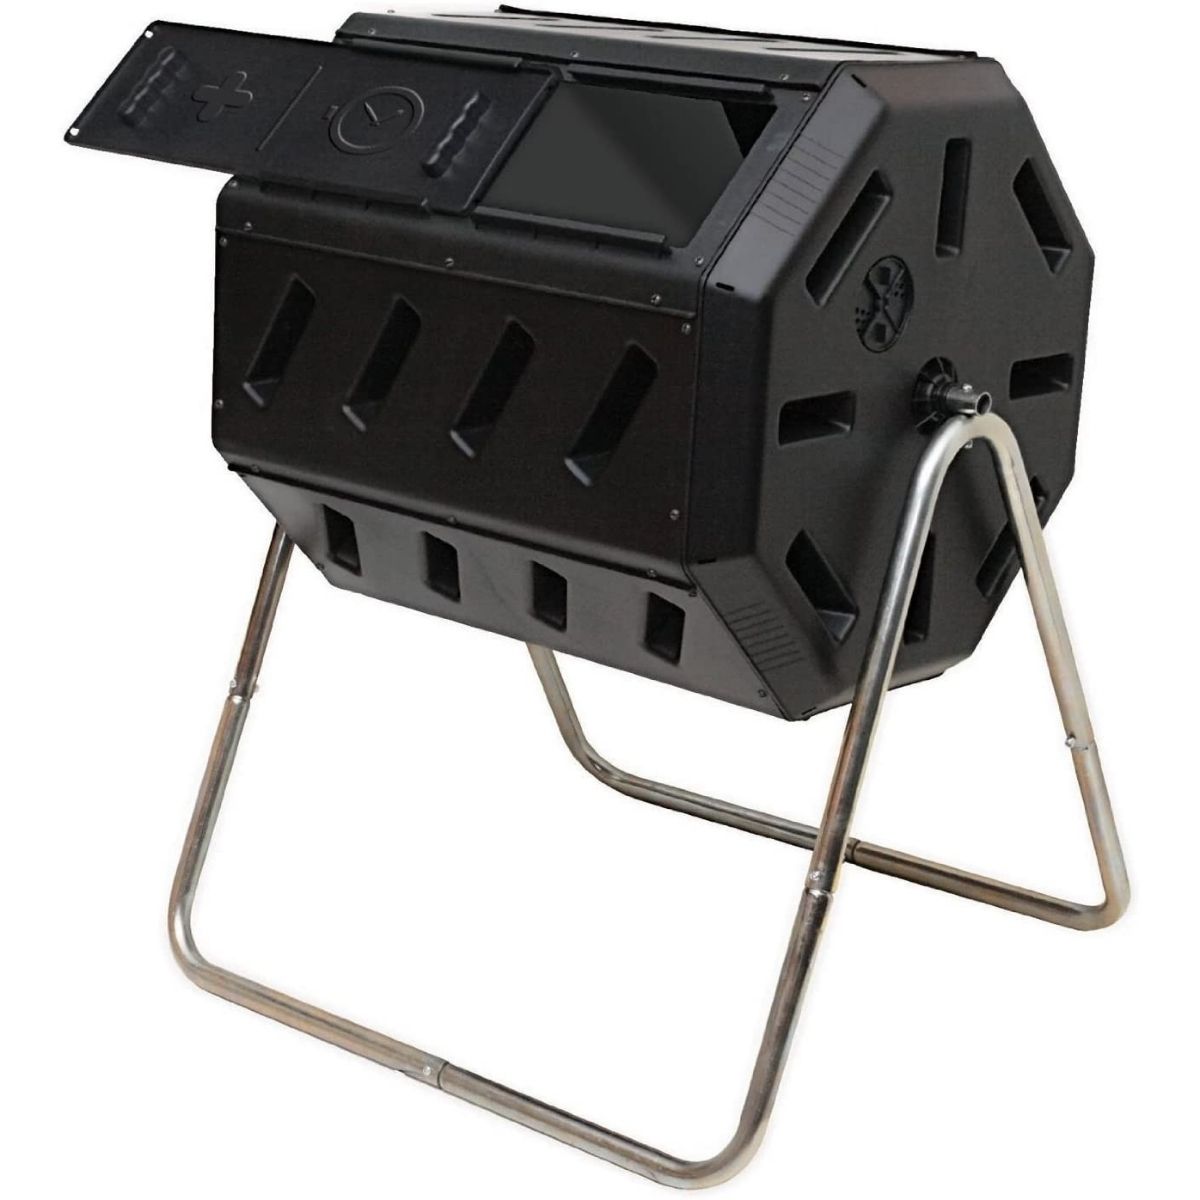 The Gifts for Gardeners Option: FCMP Outdoor Store IM4000 Dual Chamber Composter